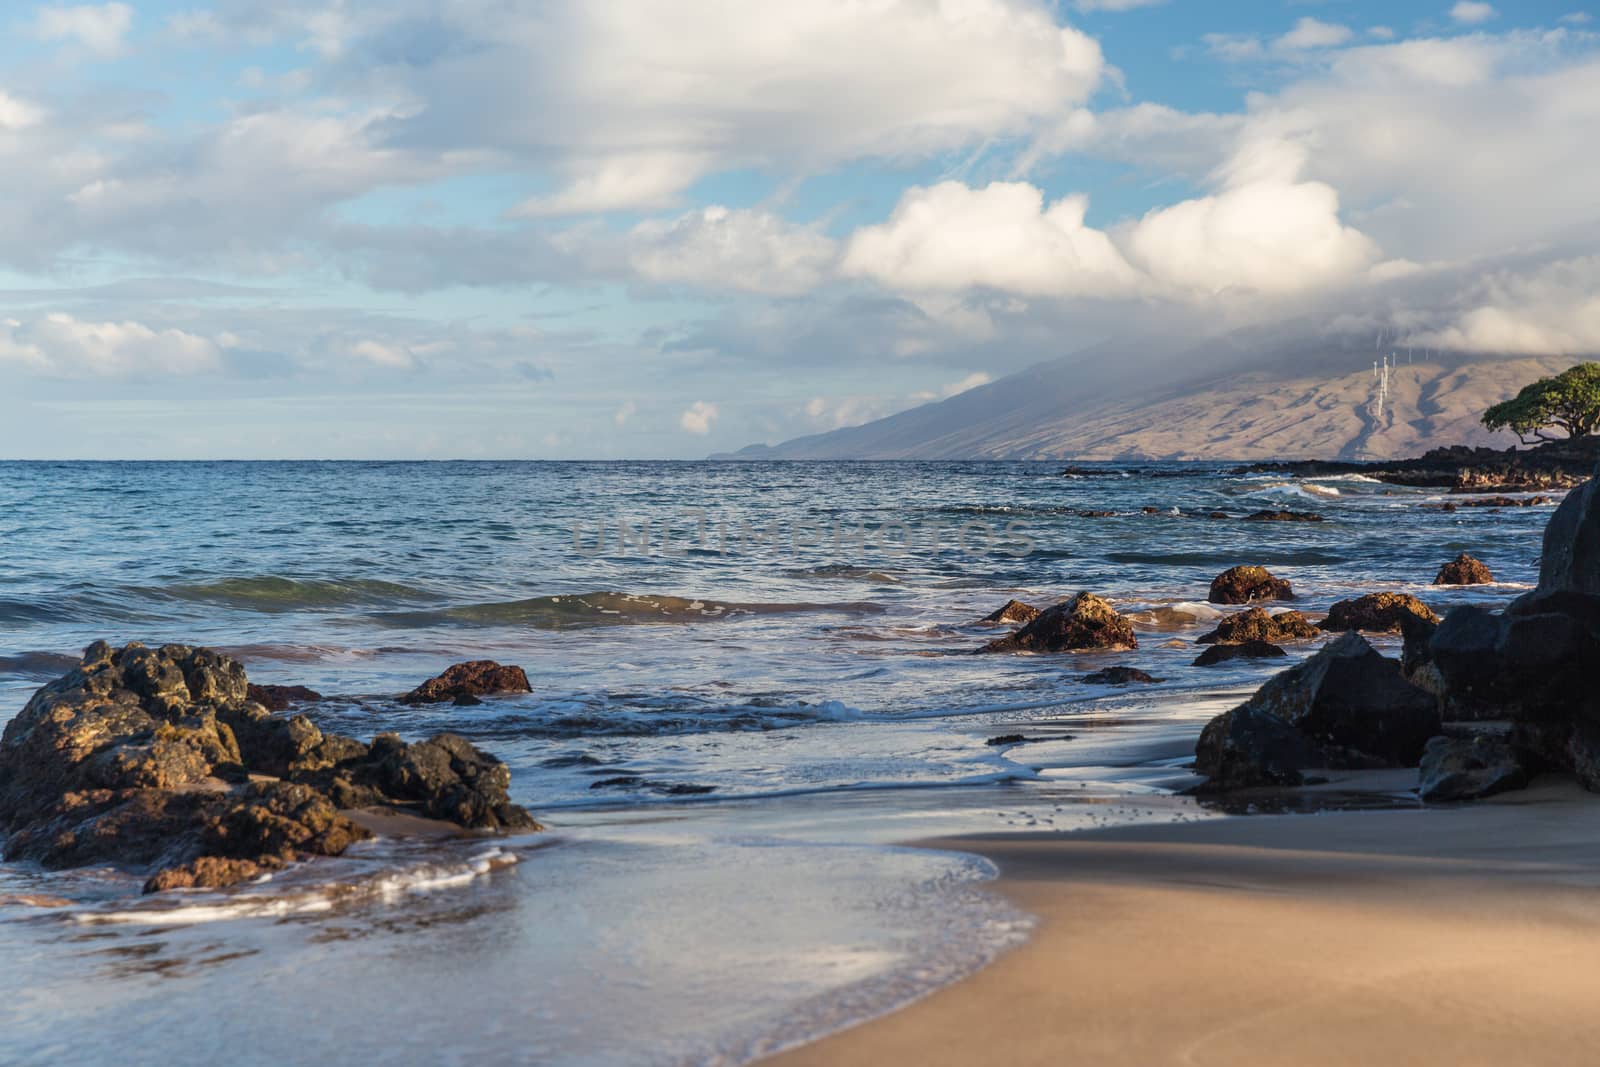 The beach and rocks in Maui Hawaii by chrisukphoto